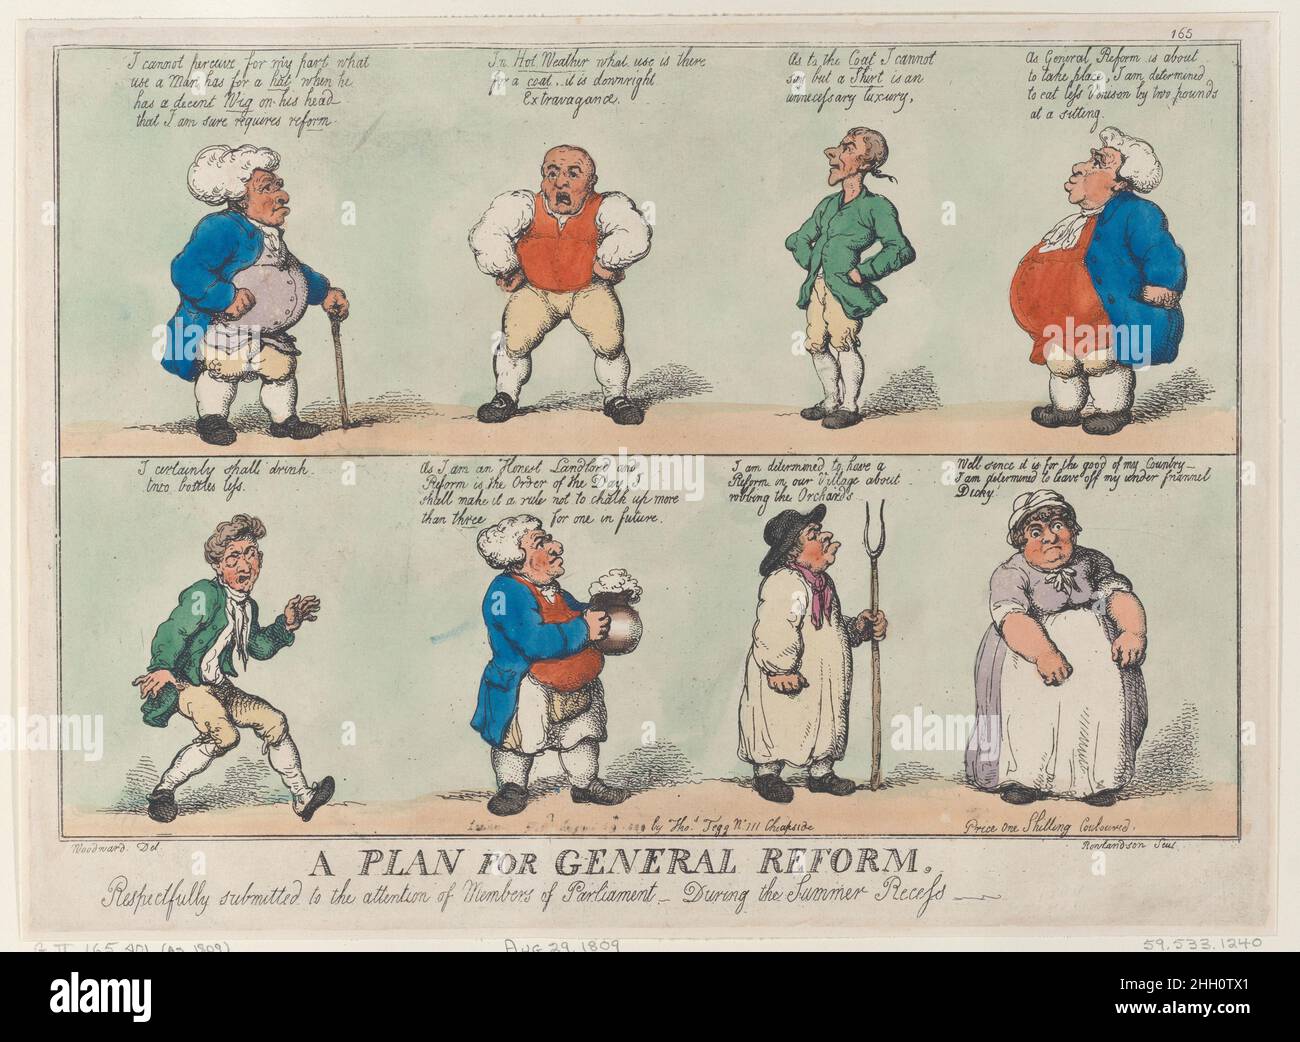 A Plan for General Reform, Respectfully submitted to the attention of Members of Parliament, During the Summer Reccess August 29, 1809 Thomas Rowlandson Eight figures arranged in two rows, each with a caption.. A Plan for General Reform, Respectfully submitted to the attention of Members of Parliament, During the Summer Reccess. Thomas Rowlandson (British, London 1757–1827 London). August 29, 1809. Hand-colored etching. Thomas Tegg (British, 1776–1846). Prints Stock Photo